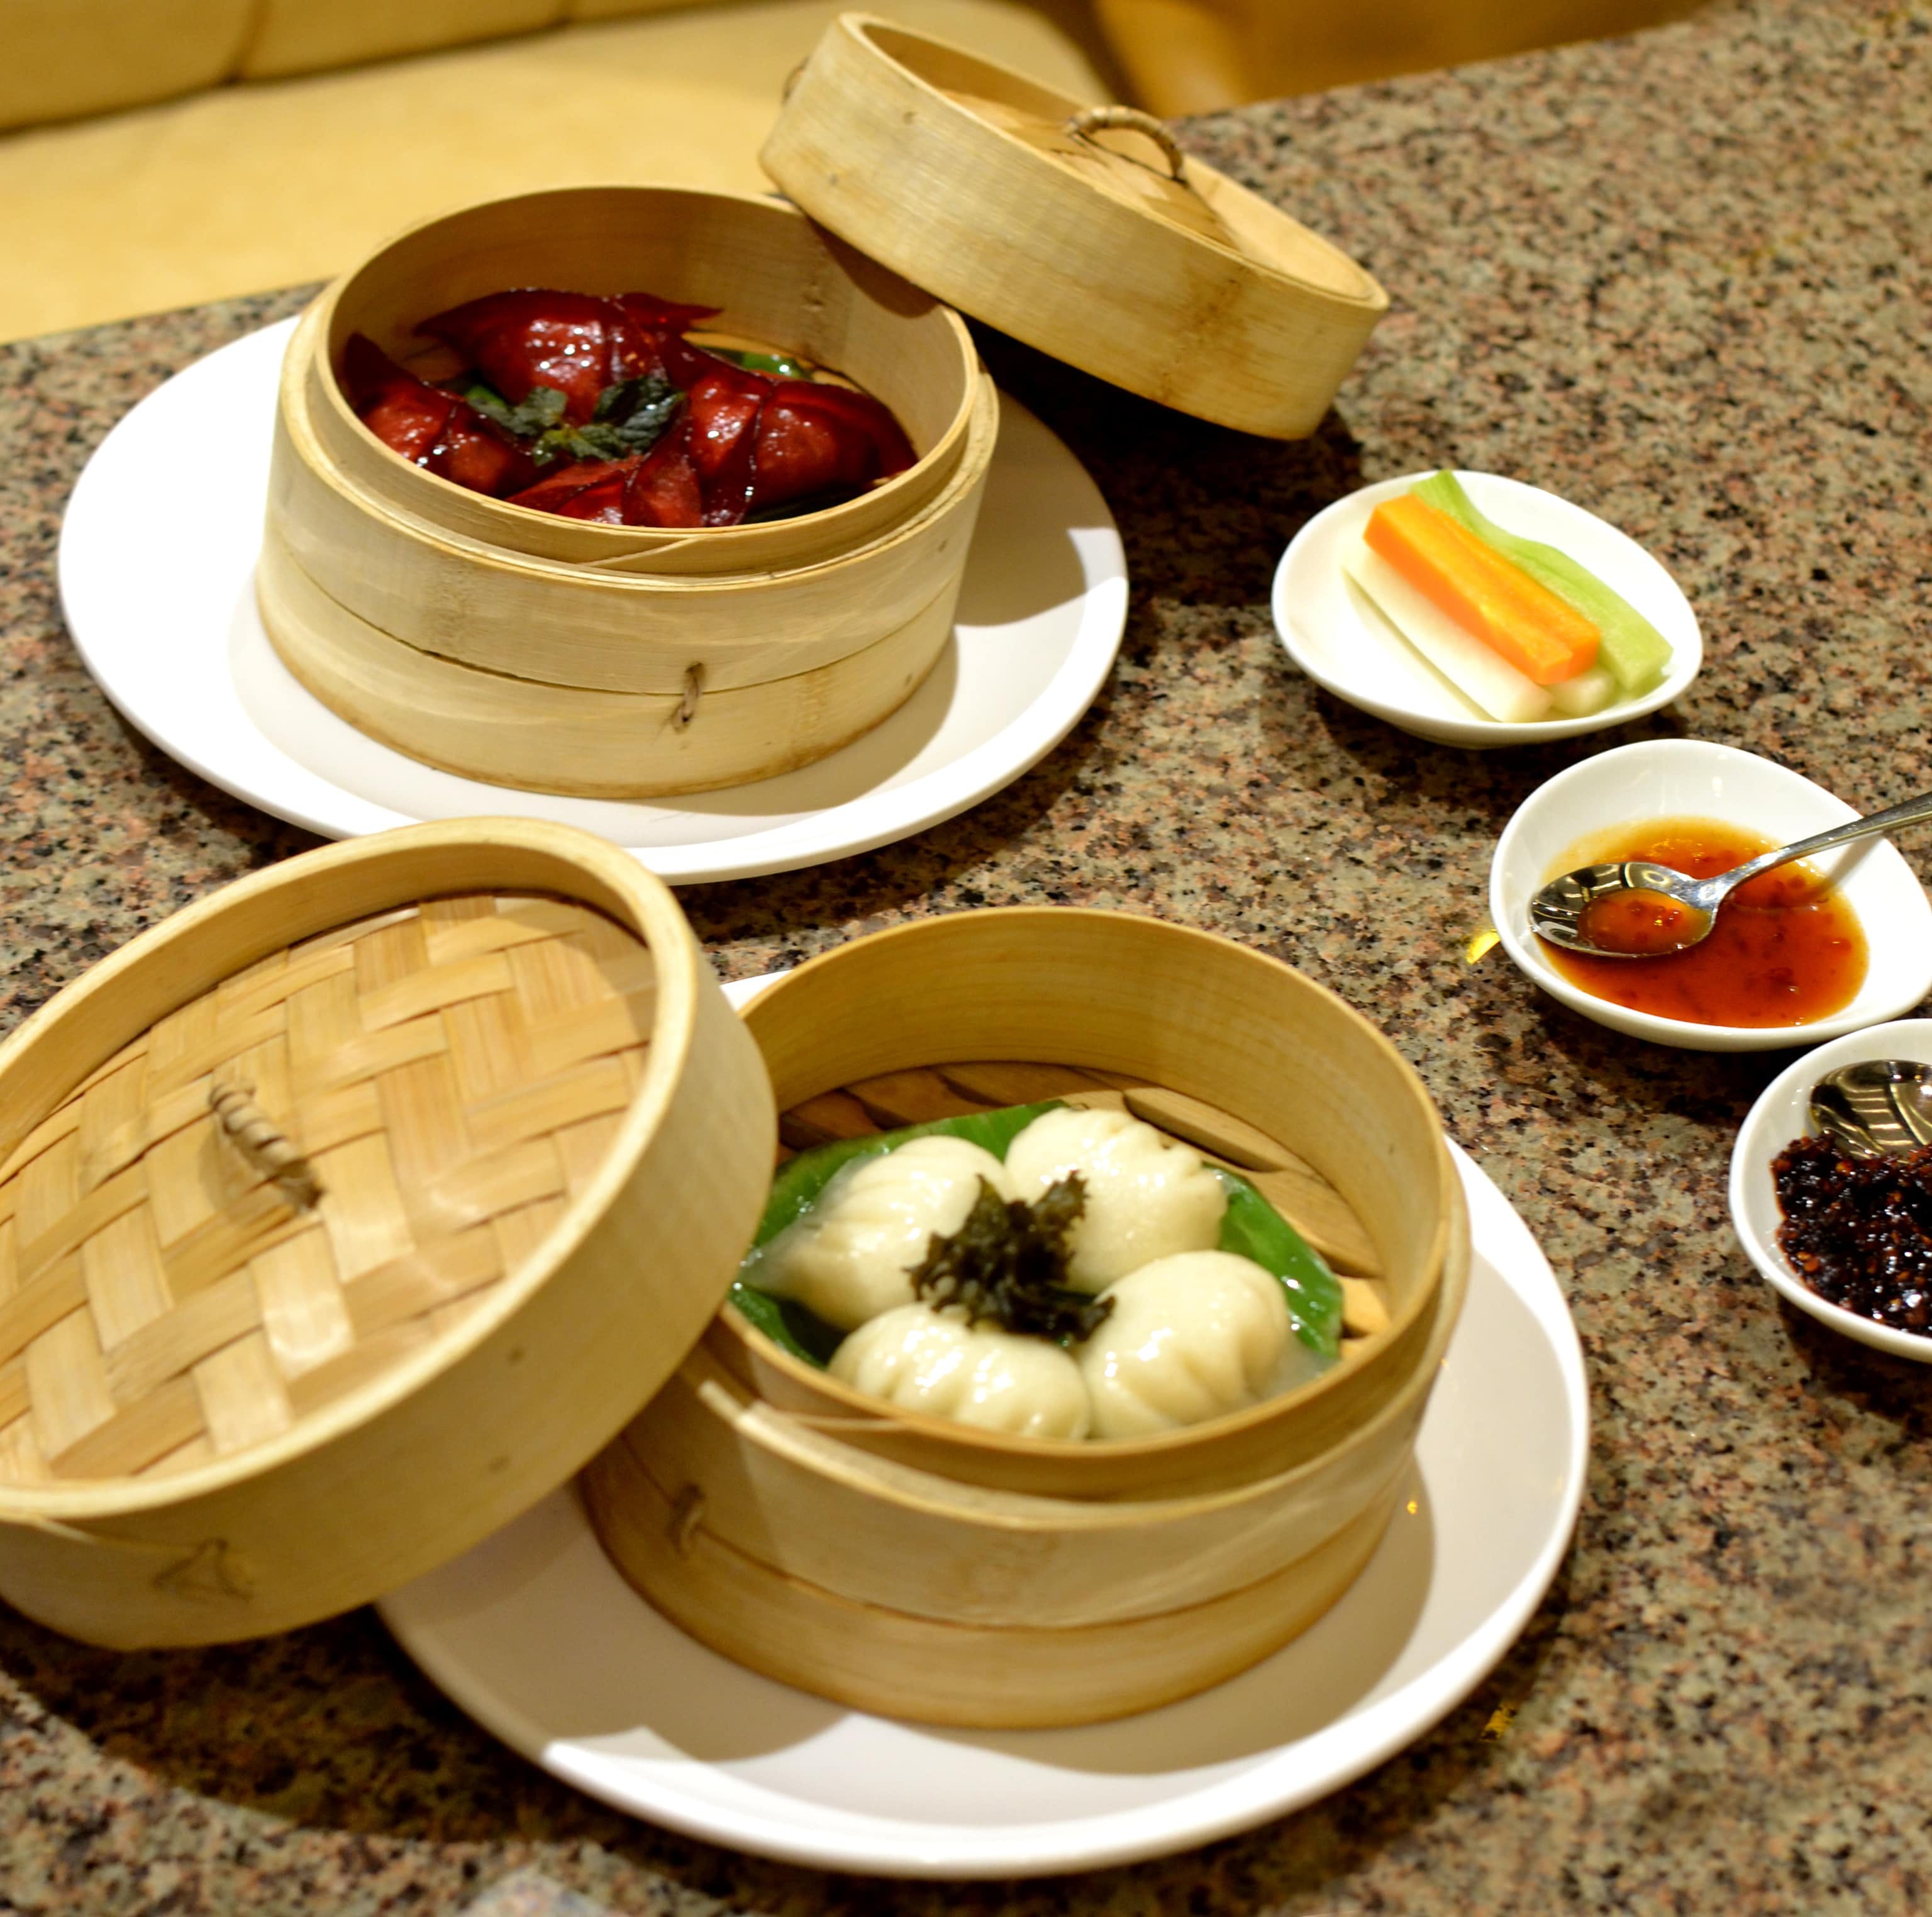 Dish,Food,Cuisine,Ingredient,Dim sum,Meal,Produce,Lunch,Chinese food,Comfort food